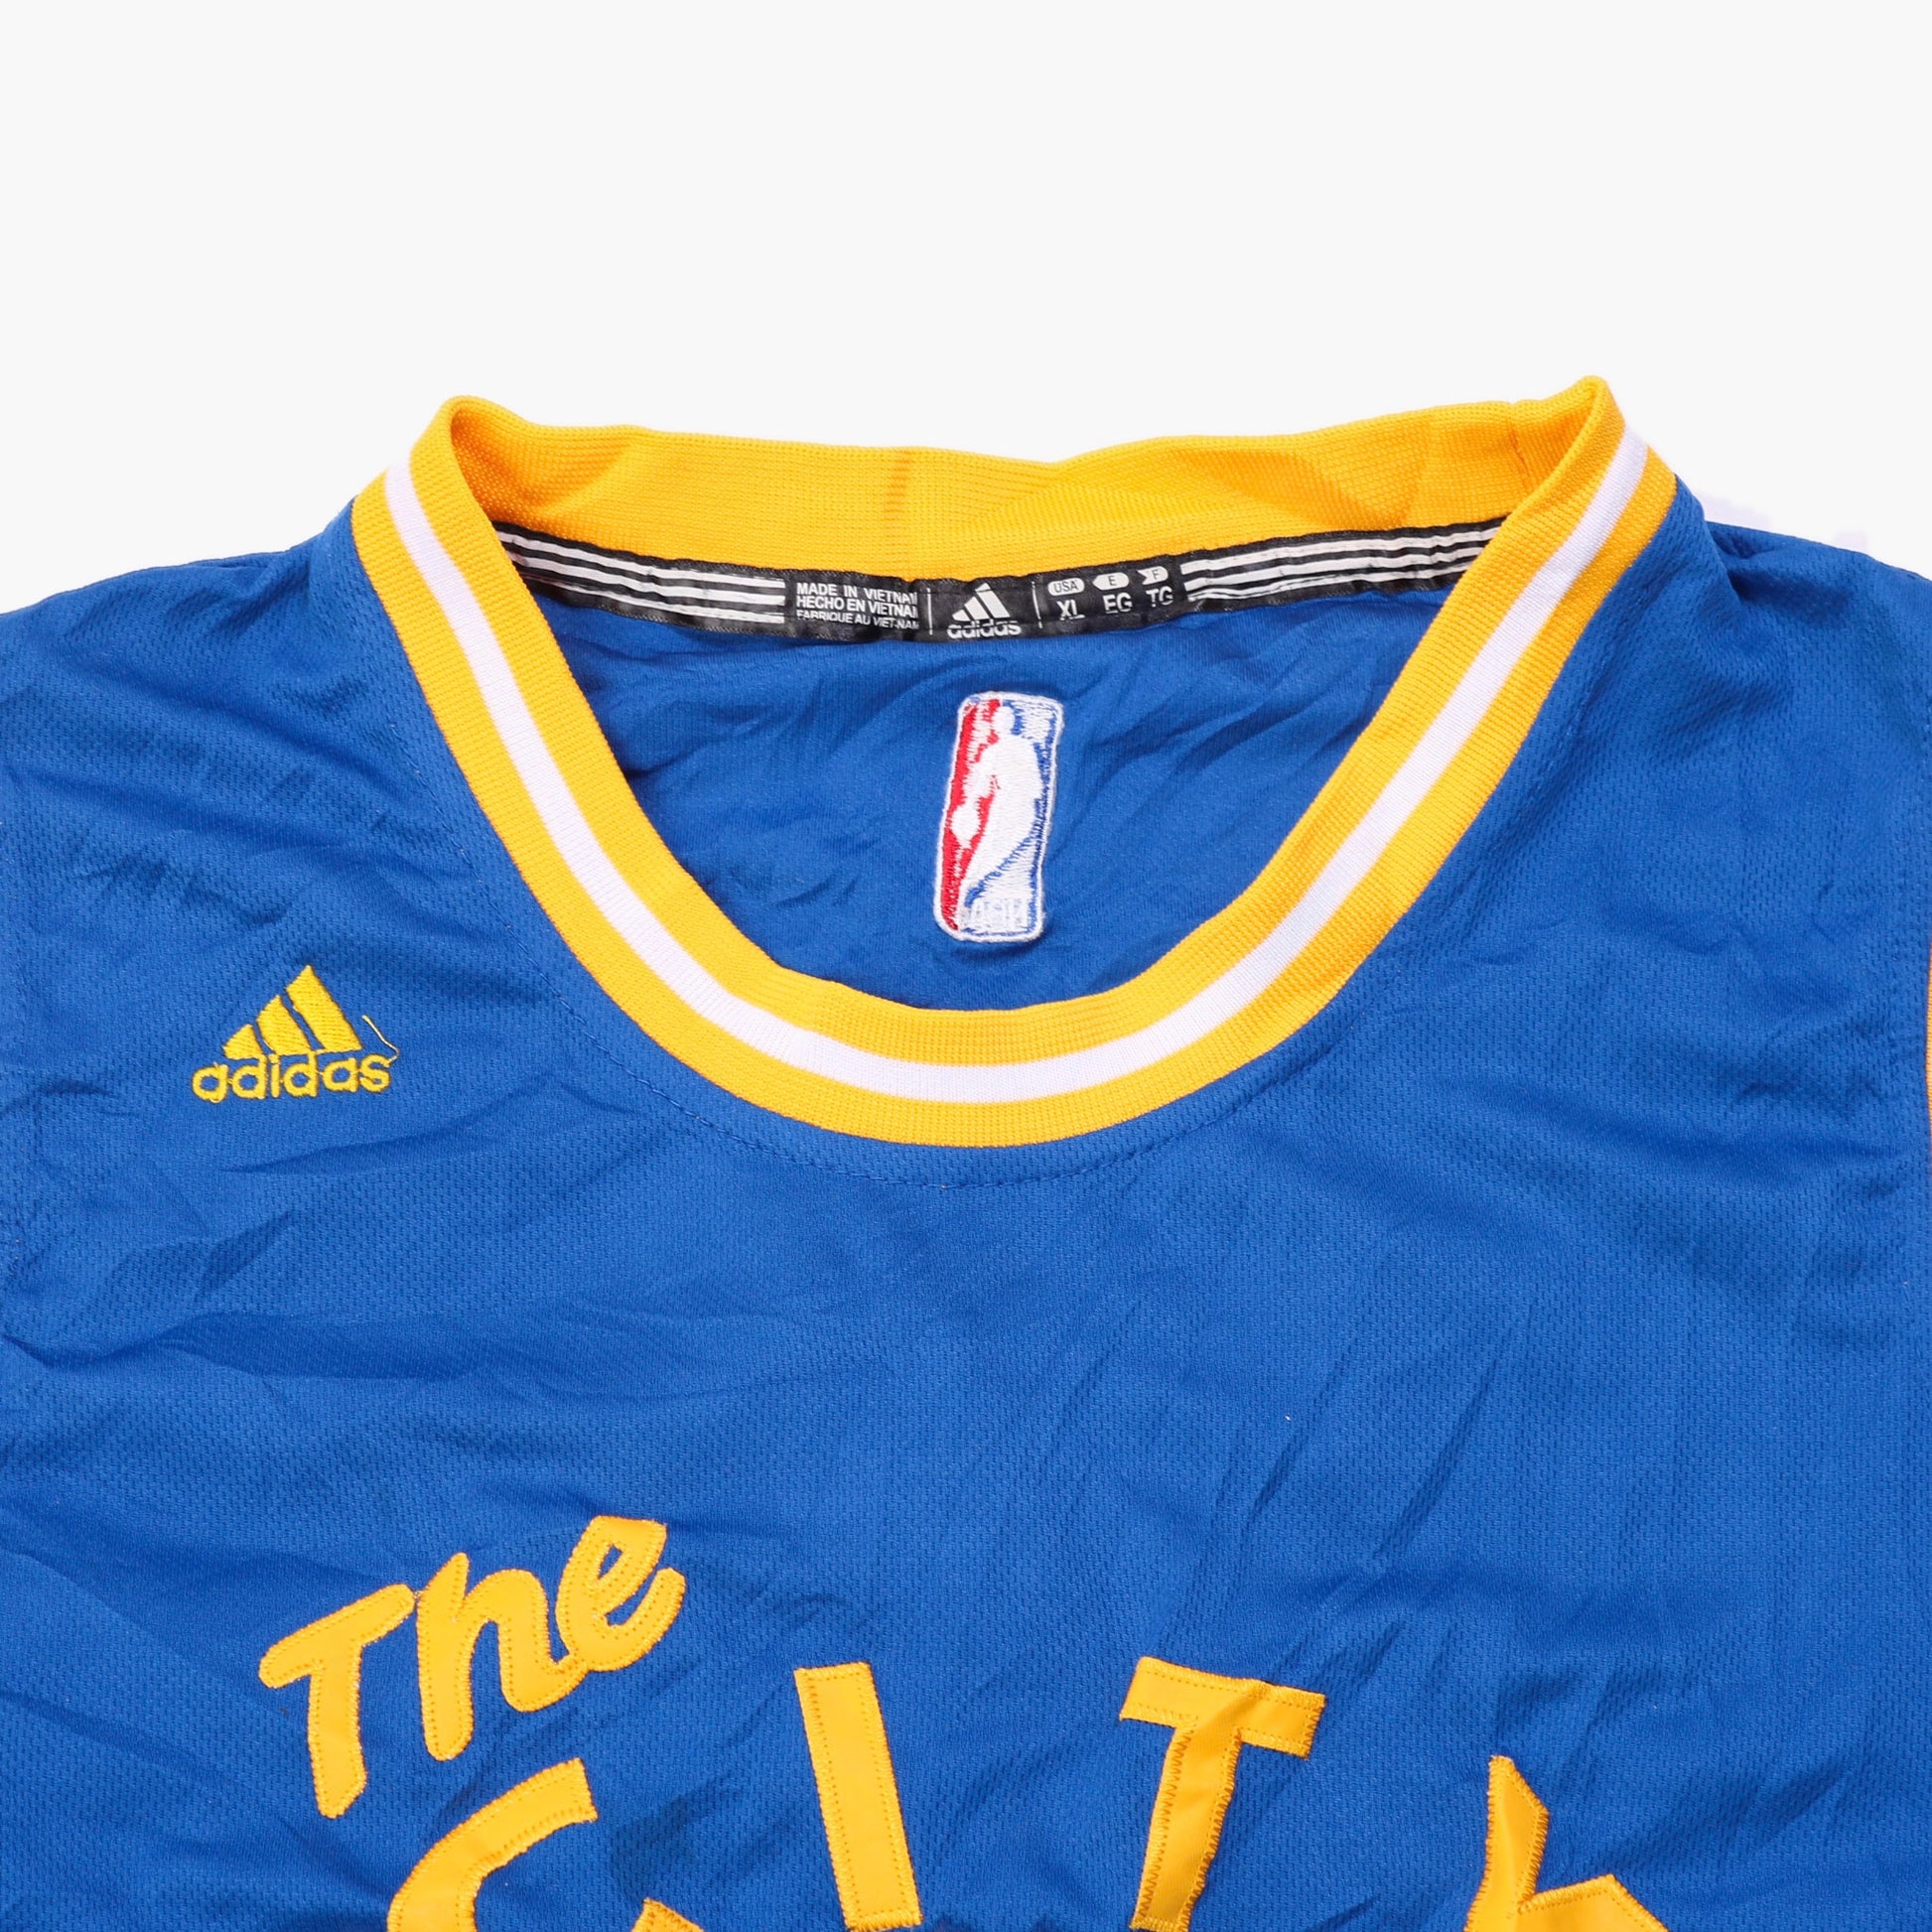 Vintage Golden State Warriors NBA Jersey 'Curry' - American Madness